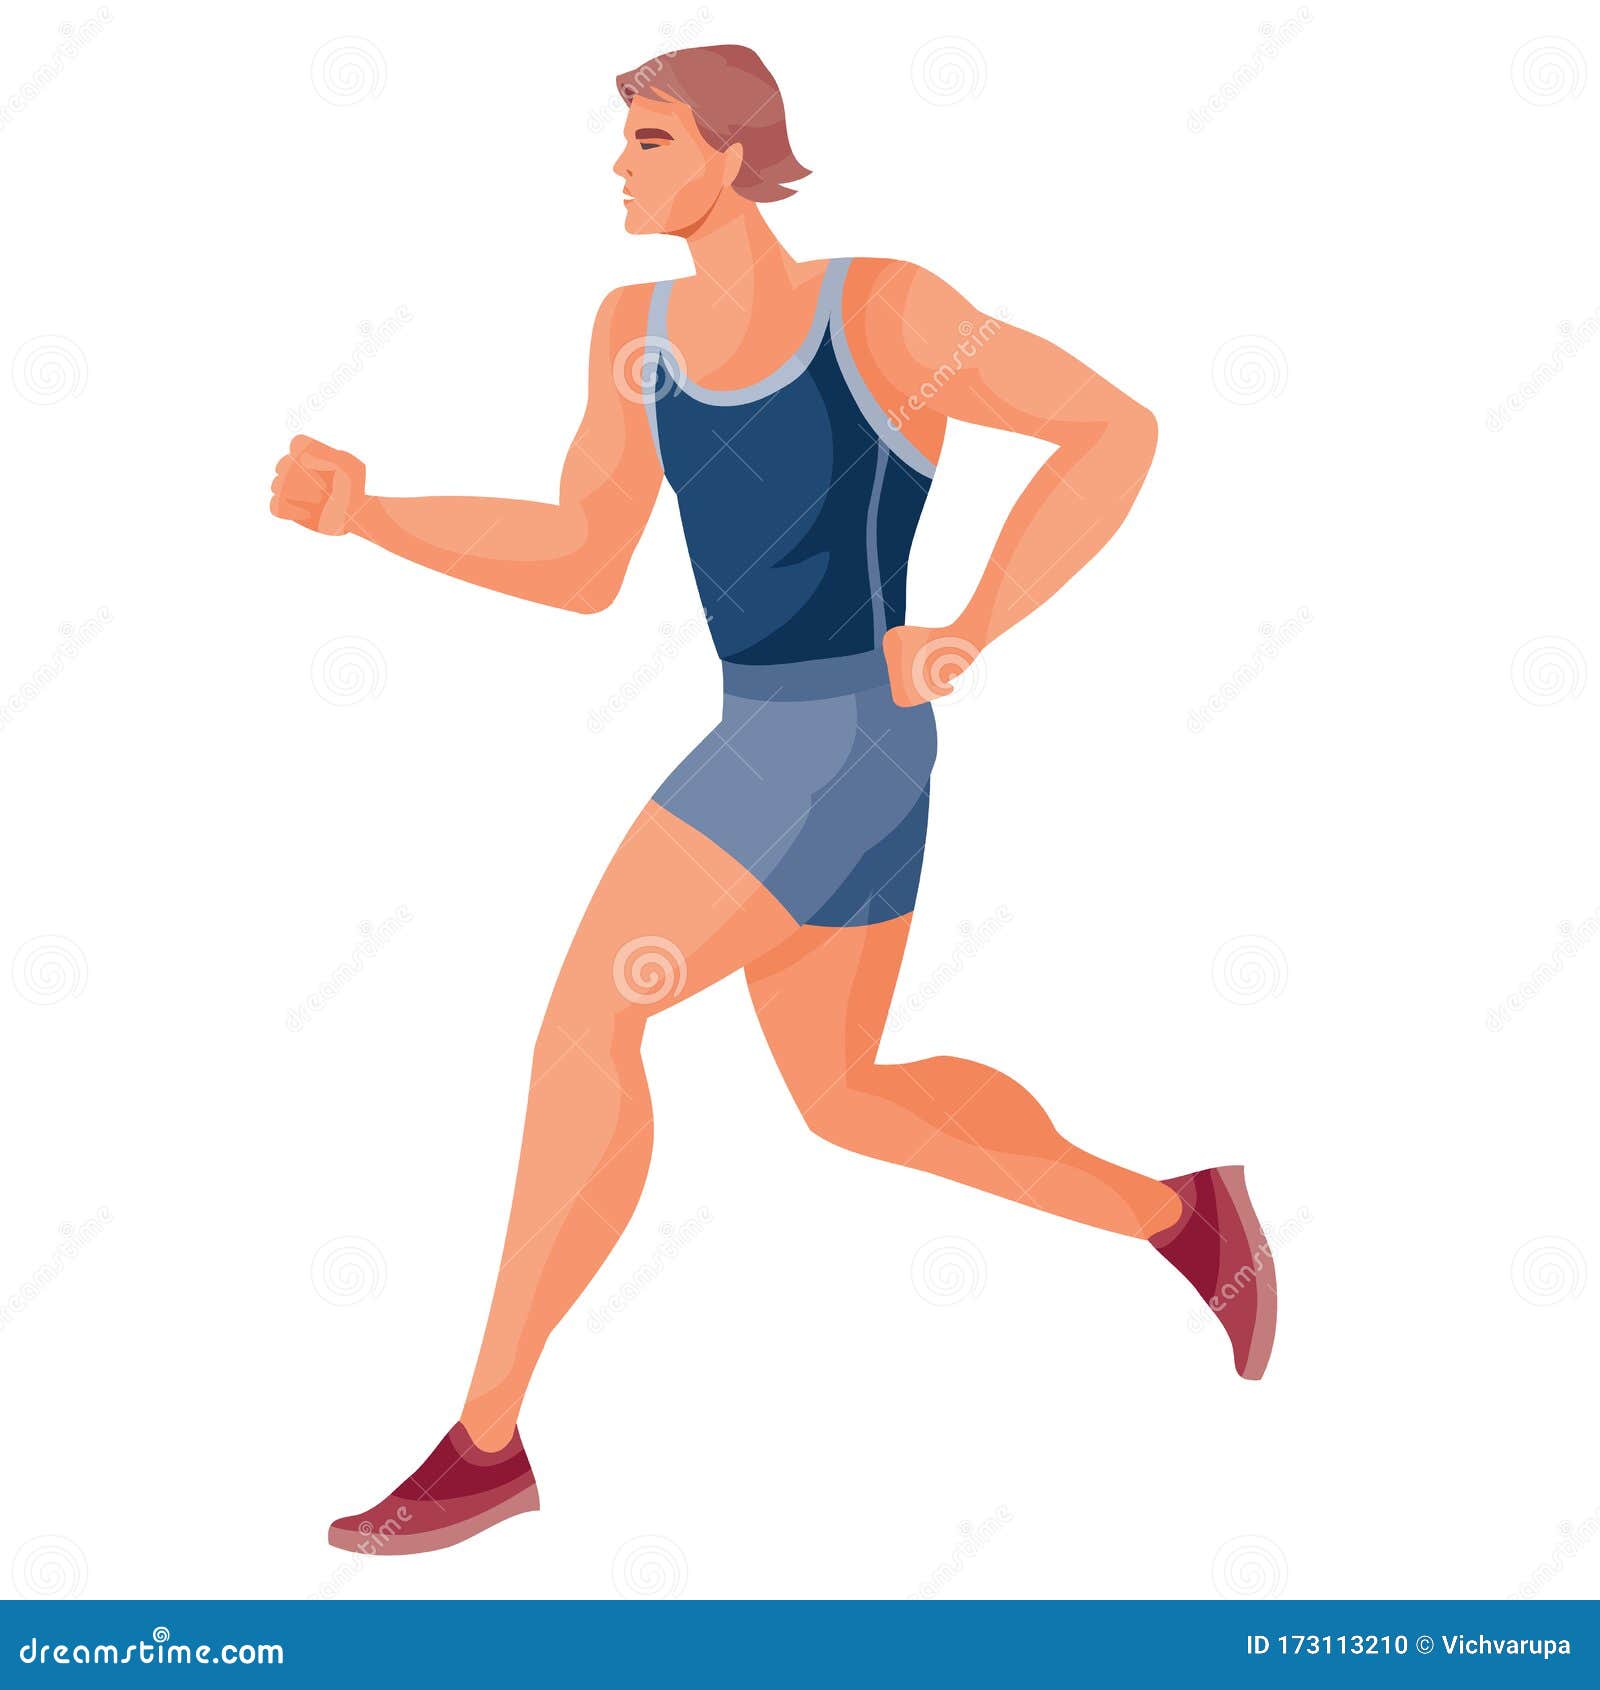 Male Athlete in a Blue Tank Top and Blue Shorts Runs Fast and Tries To ...